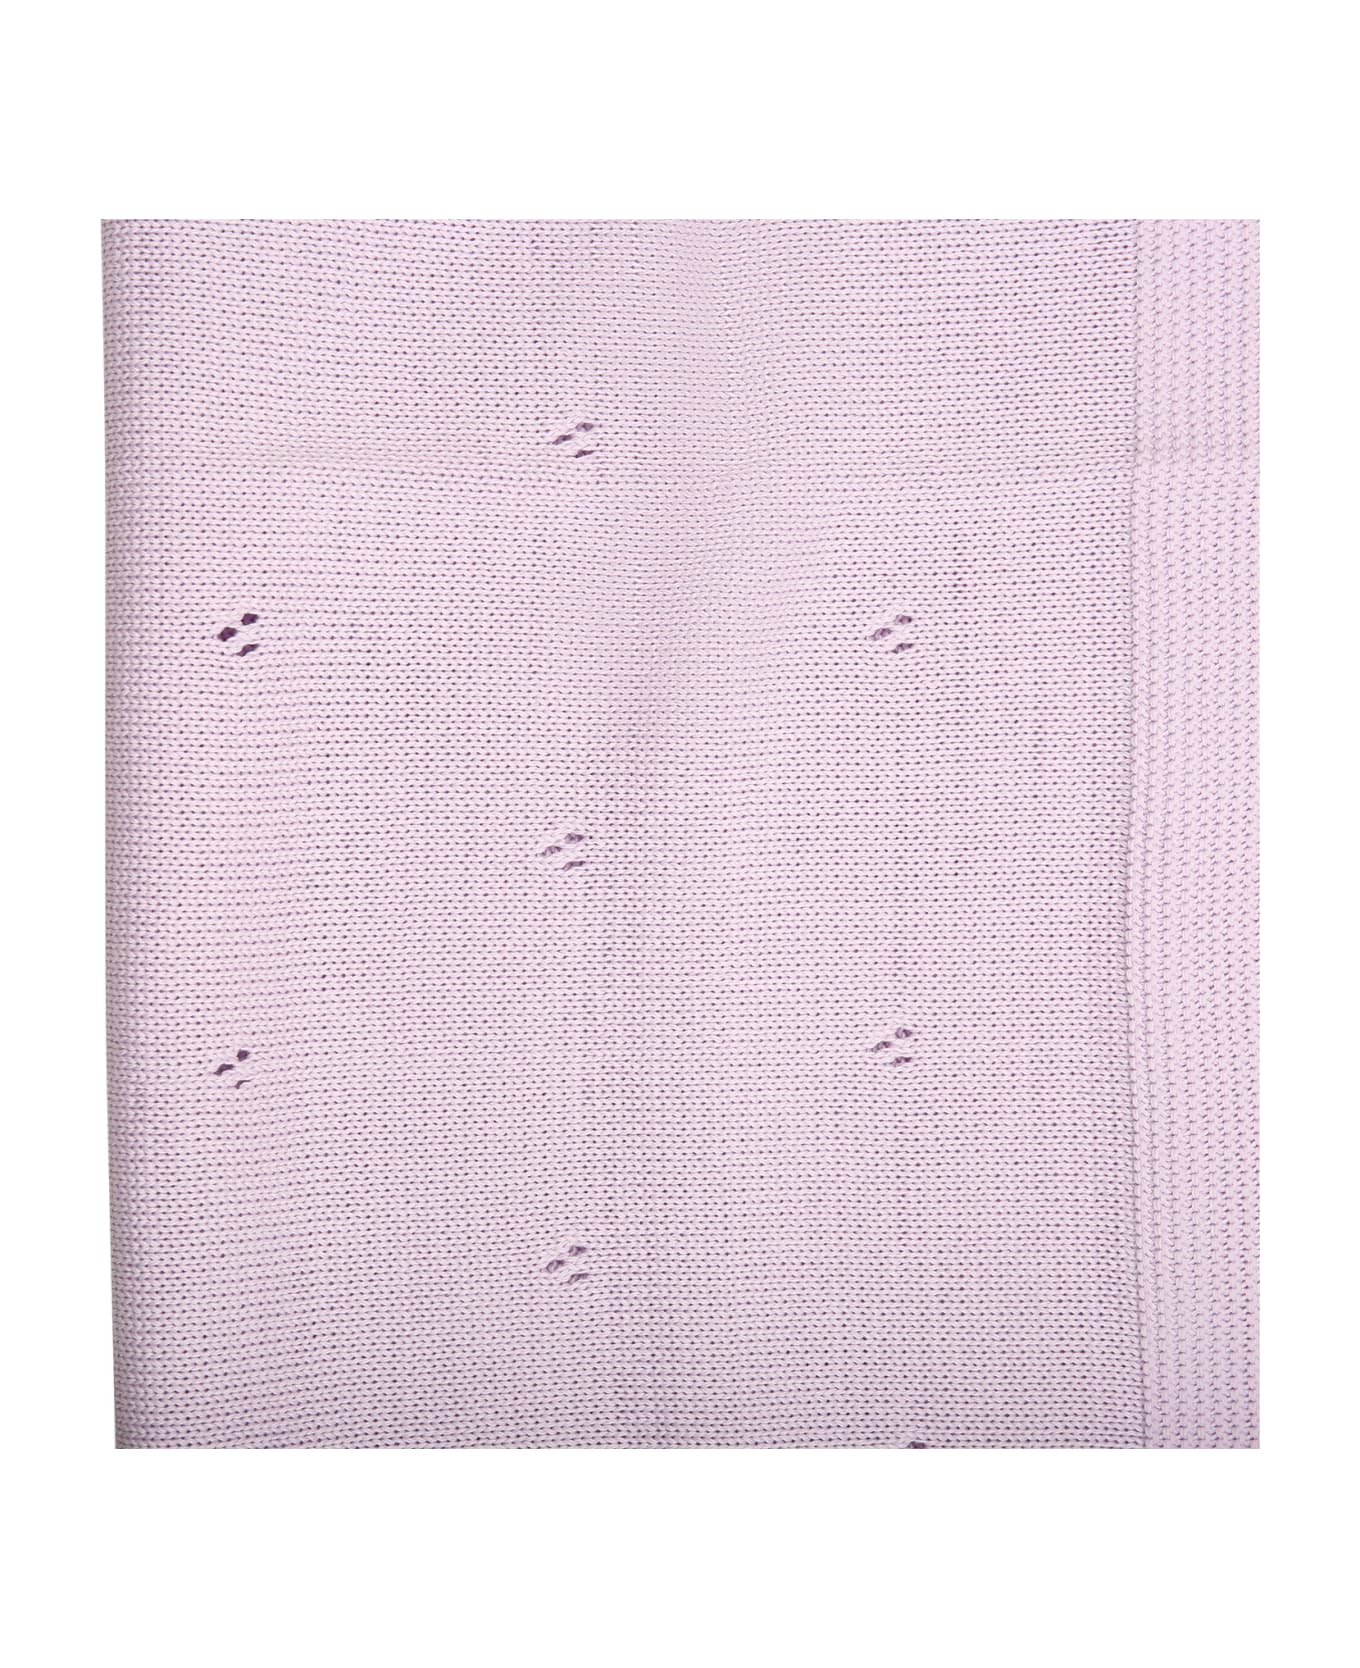 Little Bear Wisteria Baby Blanket For Baby Girl - Violet アクセサリー＆ギフト